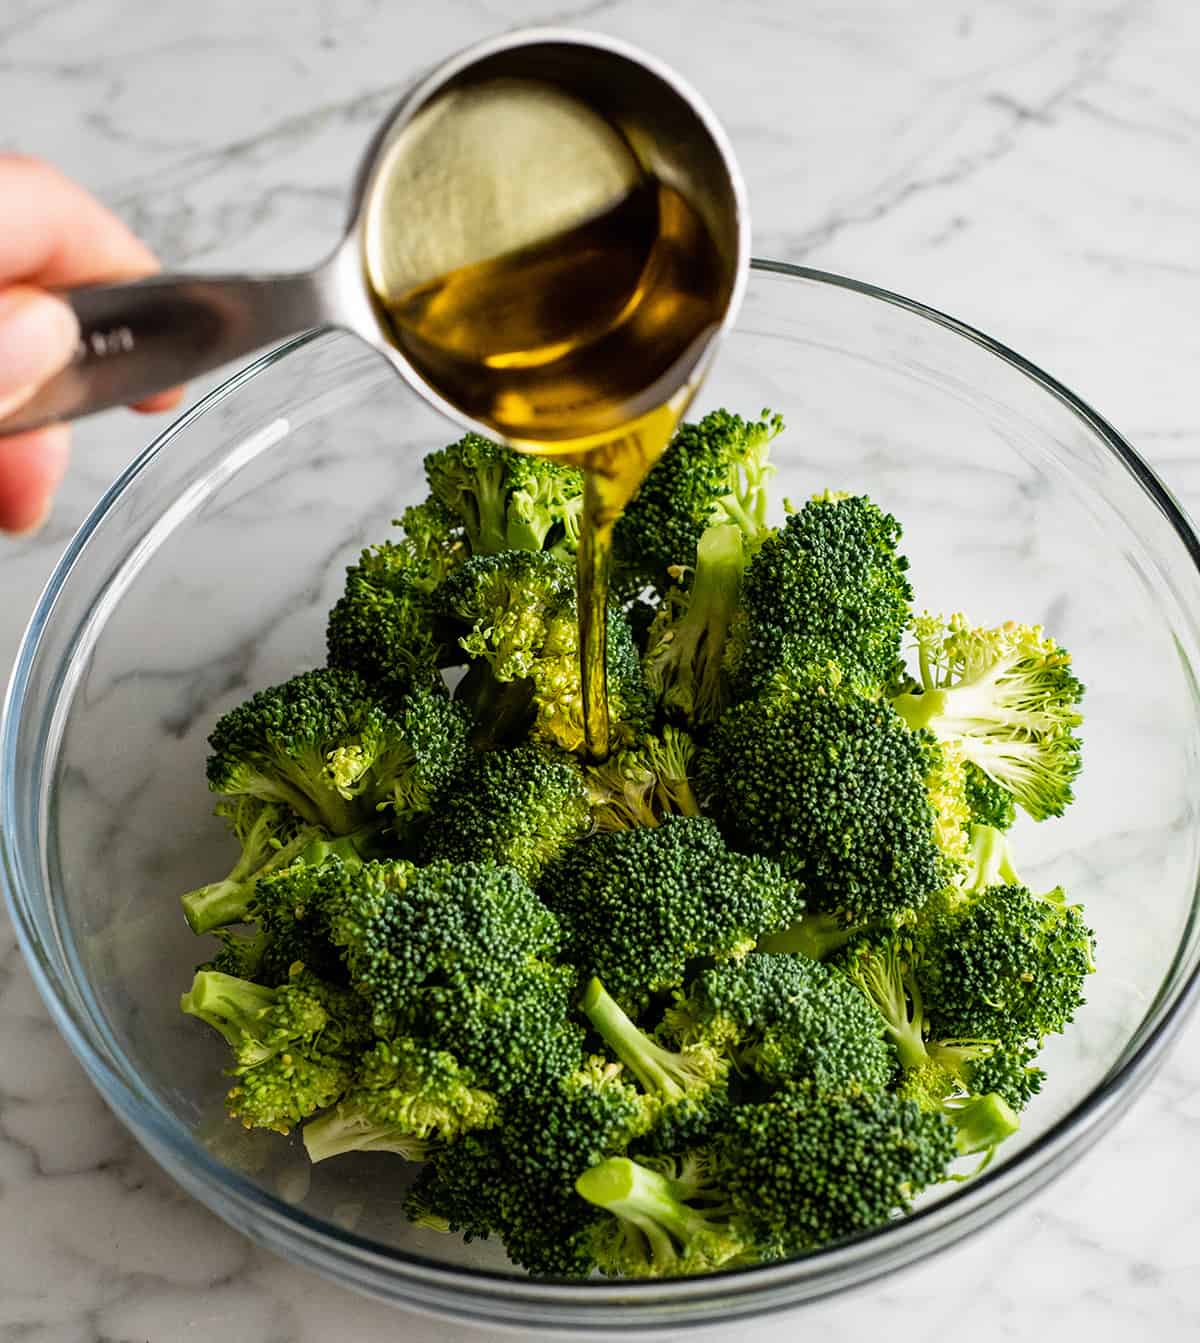 photo showing how to roast broccoli - pouring olive oil over broccoli